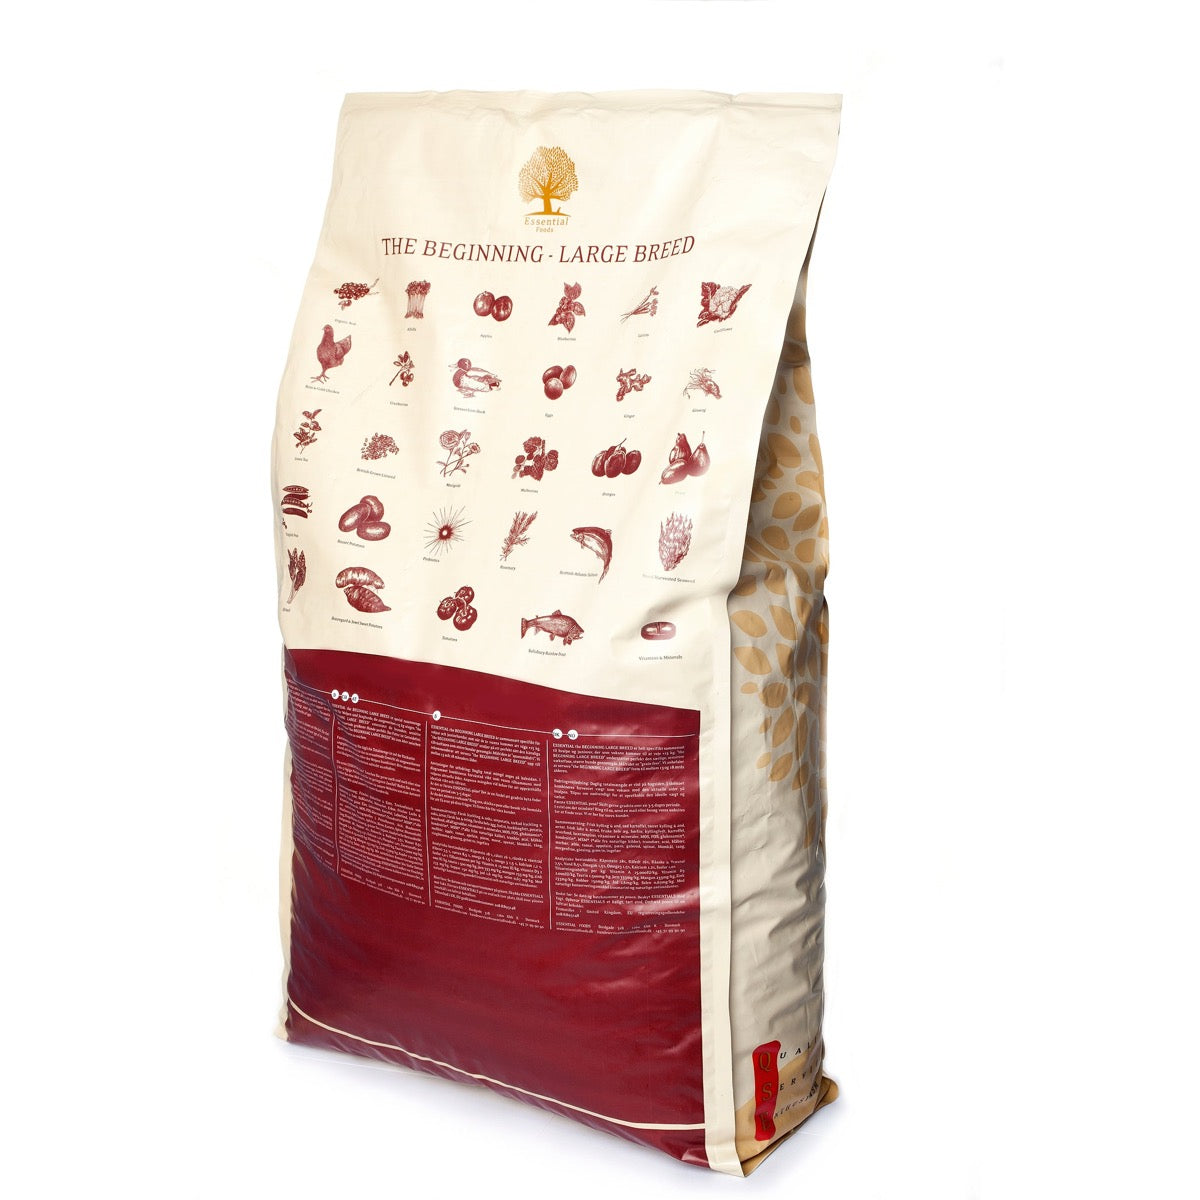 74% meat duck, chicken, salmon, trout, eggs Super premium grainless feed for puppies of large breeds The BEGINNING-LARGE BREED